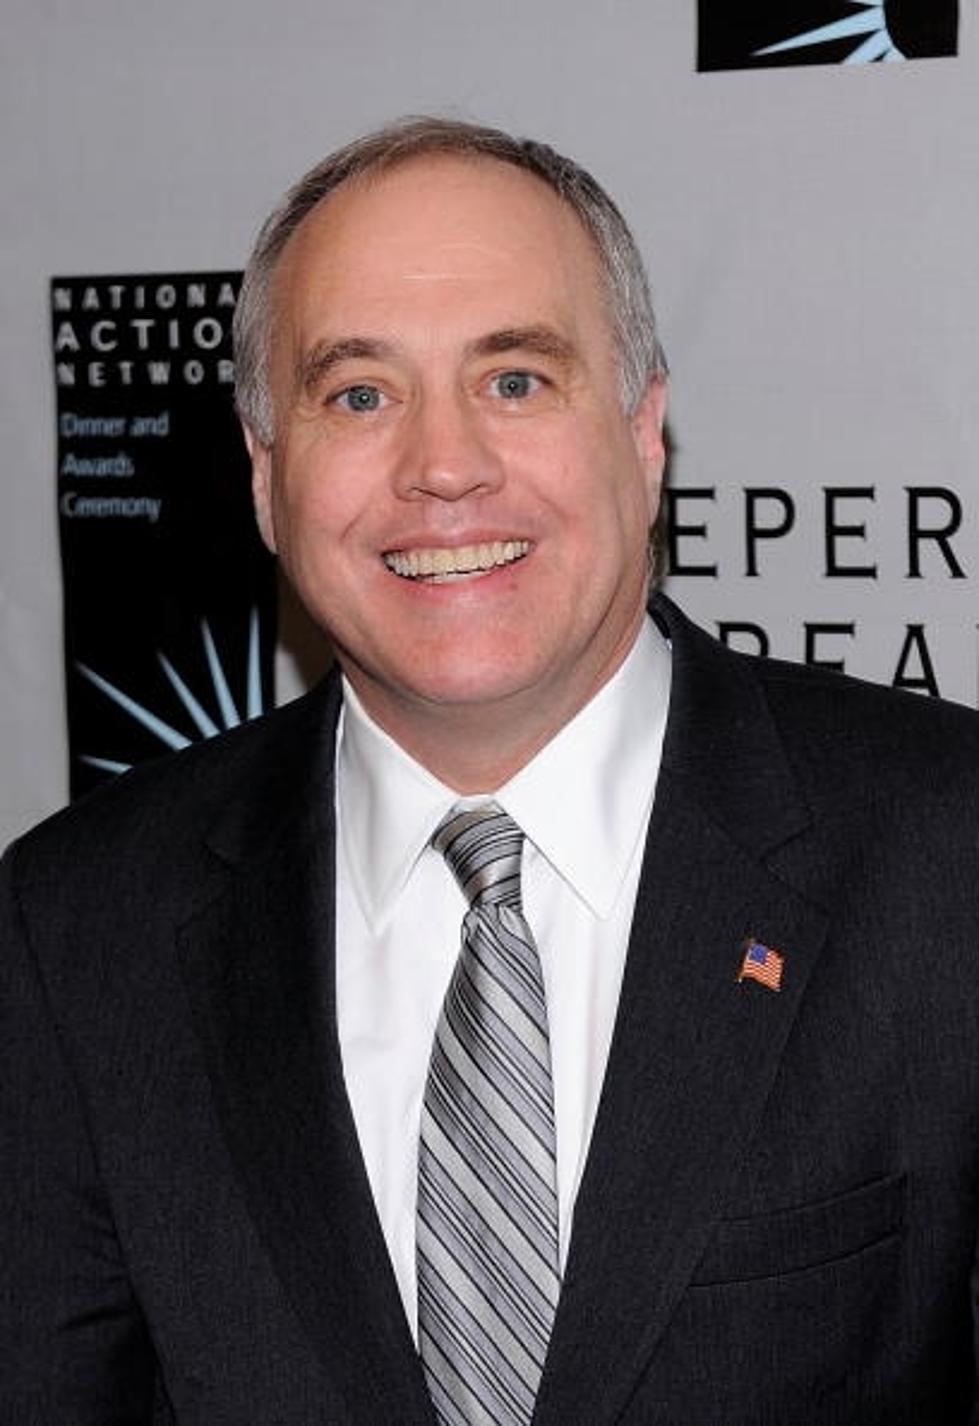 DiNapoli Sending Fraud Unit To Audit SUNY Research Foundation